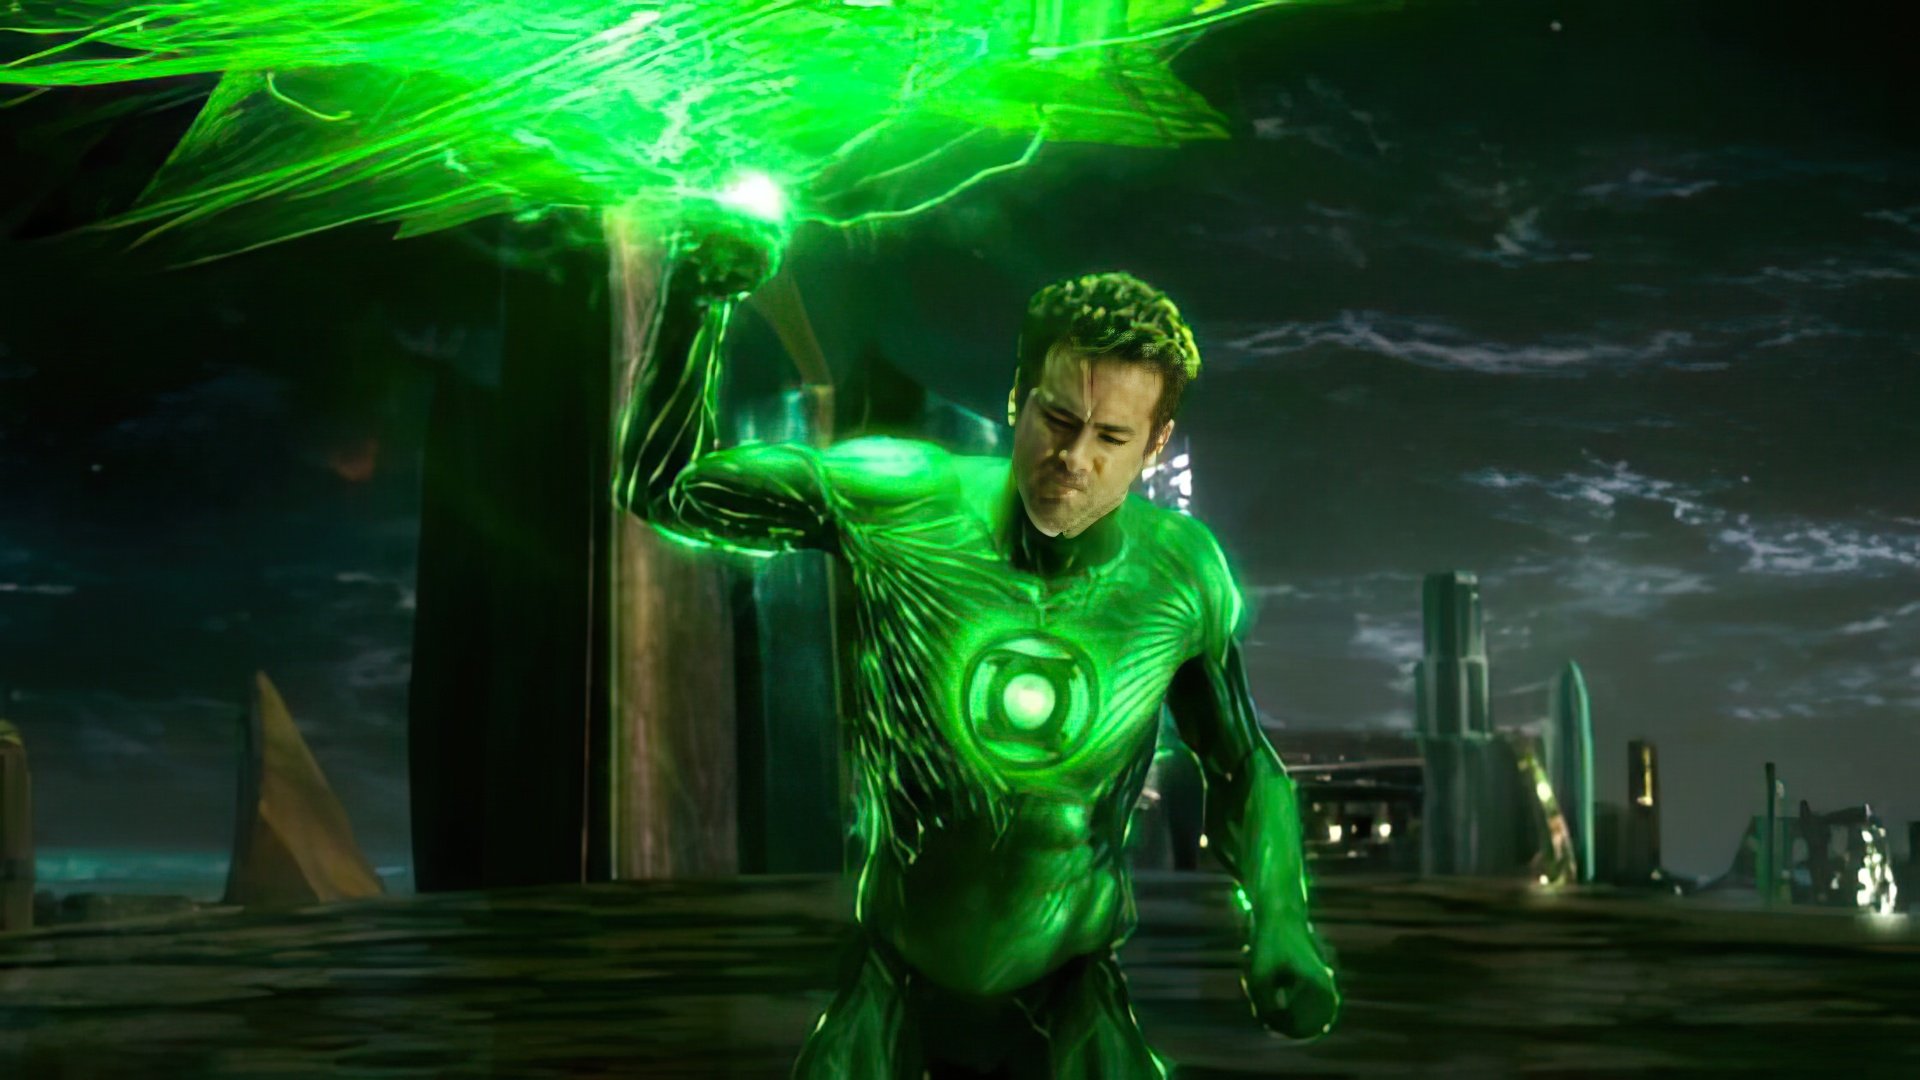 Green Lantern. Reynolds hardly managed to cope with his role of a superhero